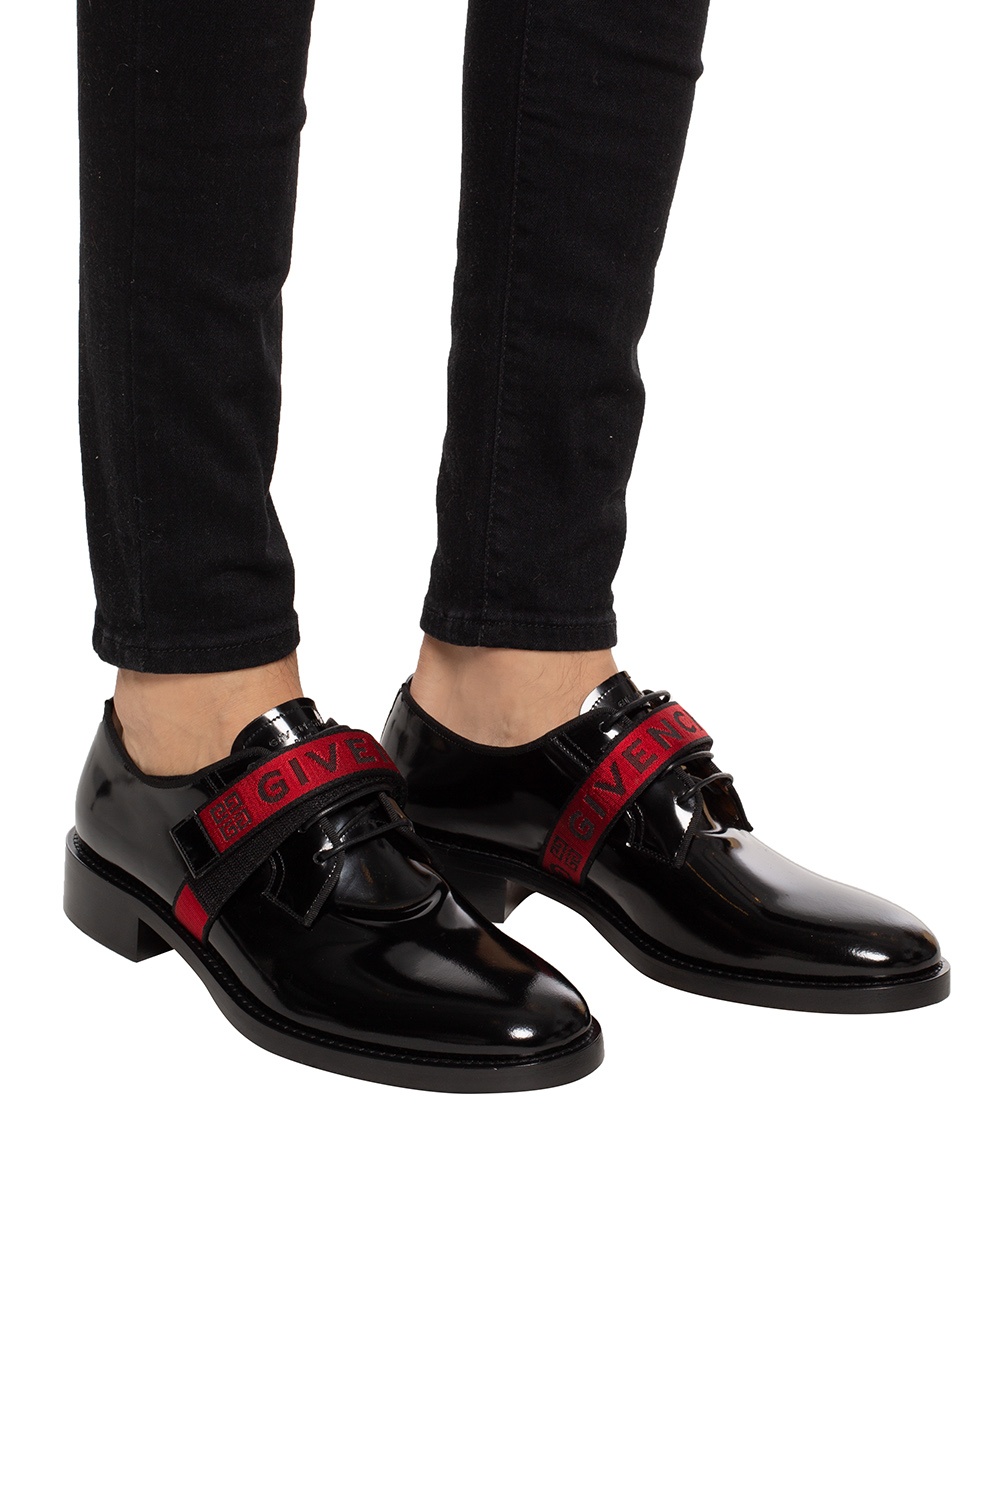 givenchy derby